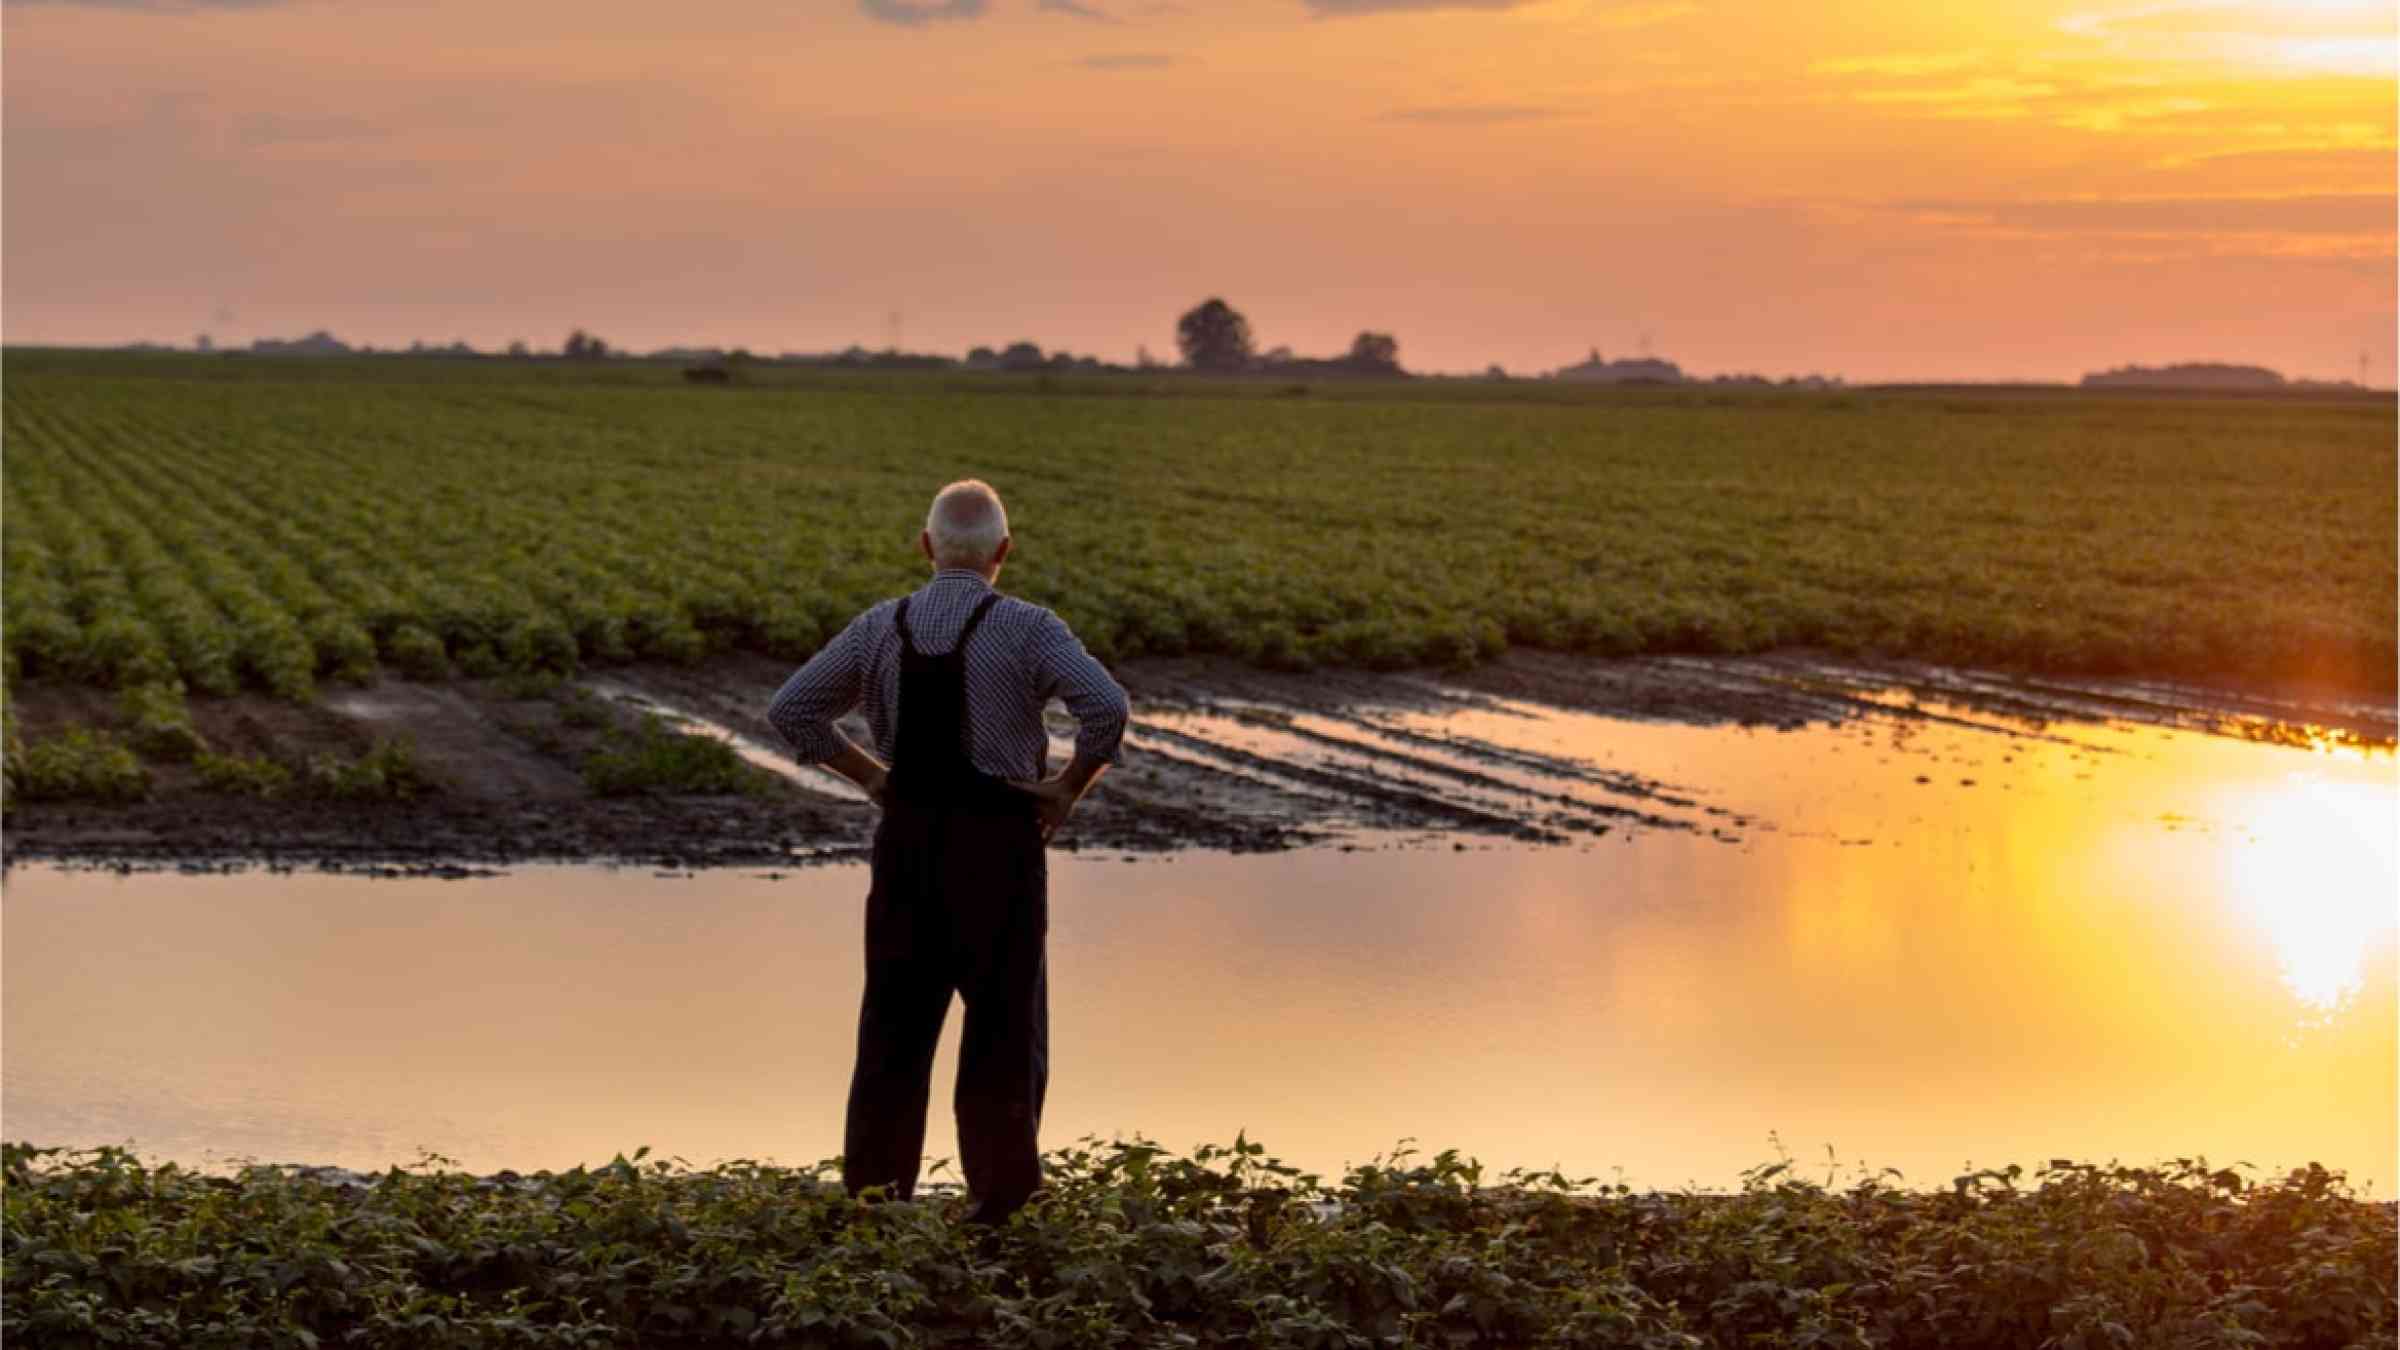 A farmer overlooking his flooded crop fields during sunset.